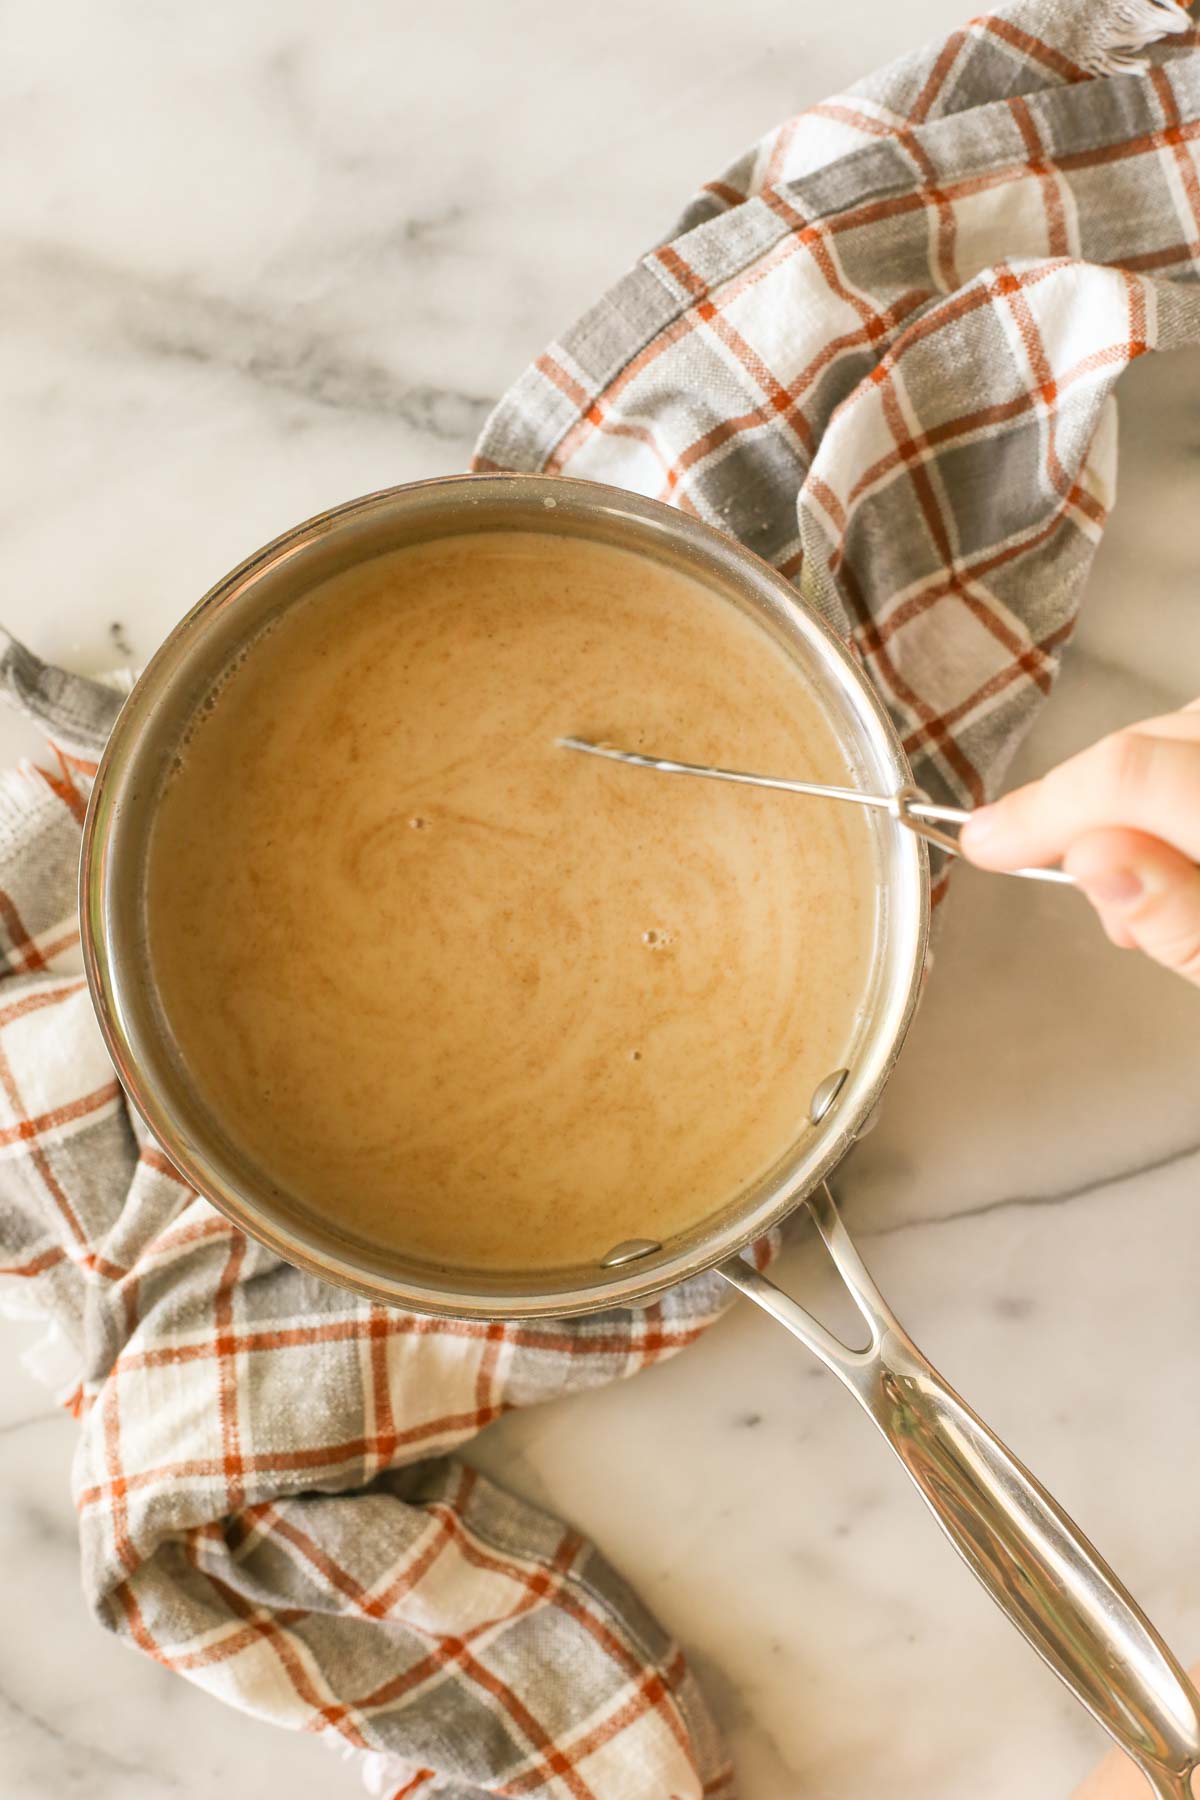 Overhead shot of a saucepan of Brown Sugar and Cinnamon Coffee Creamer with a hand holding on to a whisk in the saucepan, and the saucepan is sitting on a plaid cloth on a marble background. 